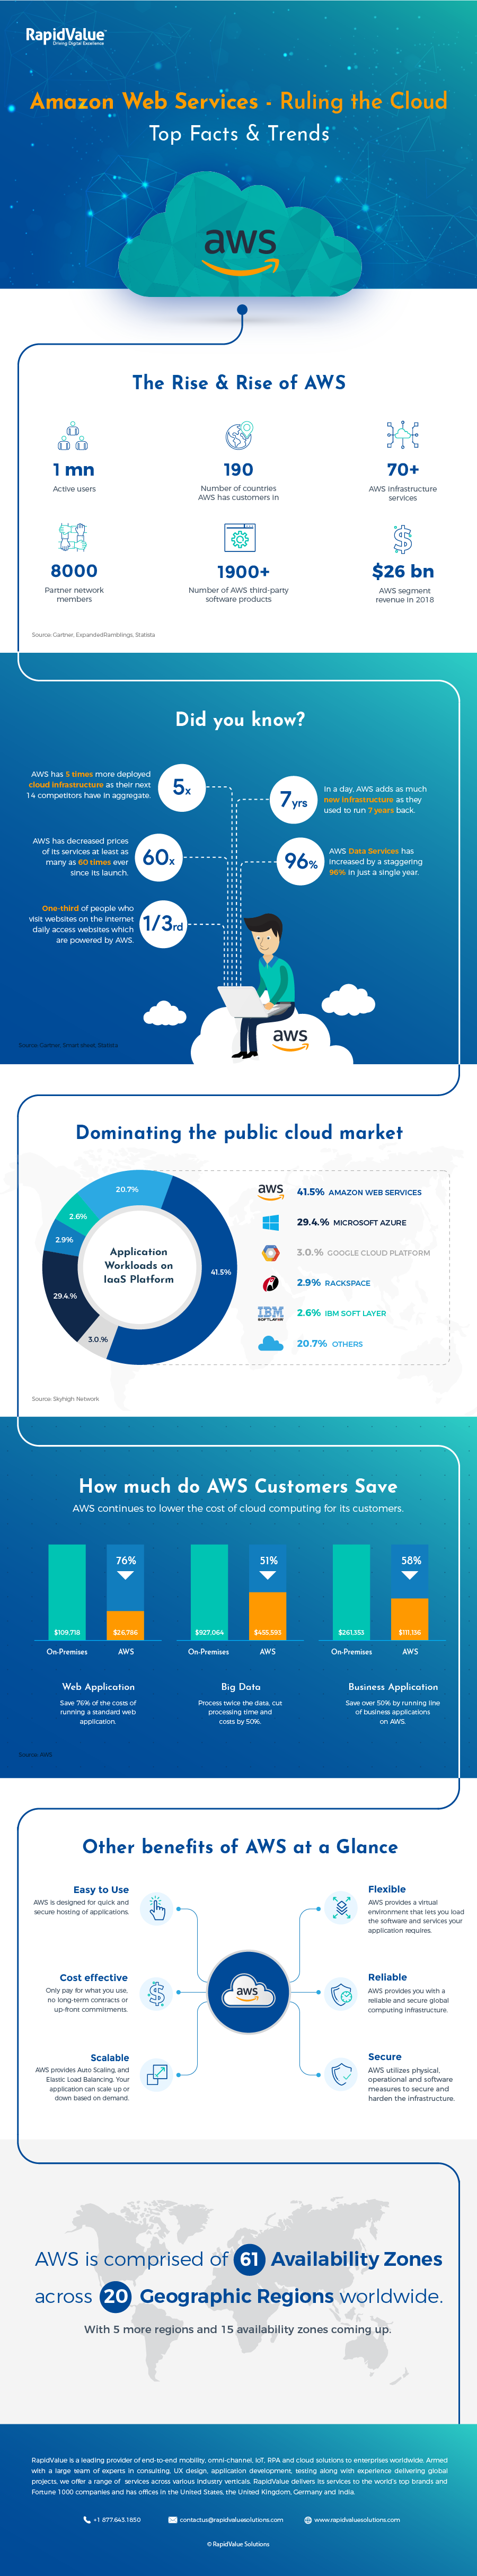 Amazon Web Services – Ruling the Cloud